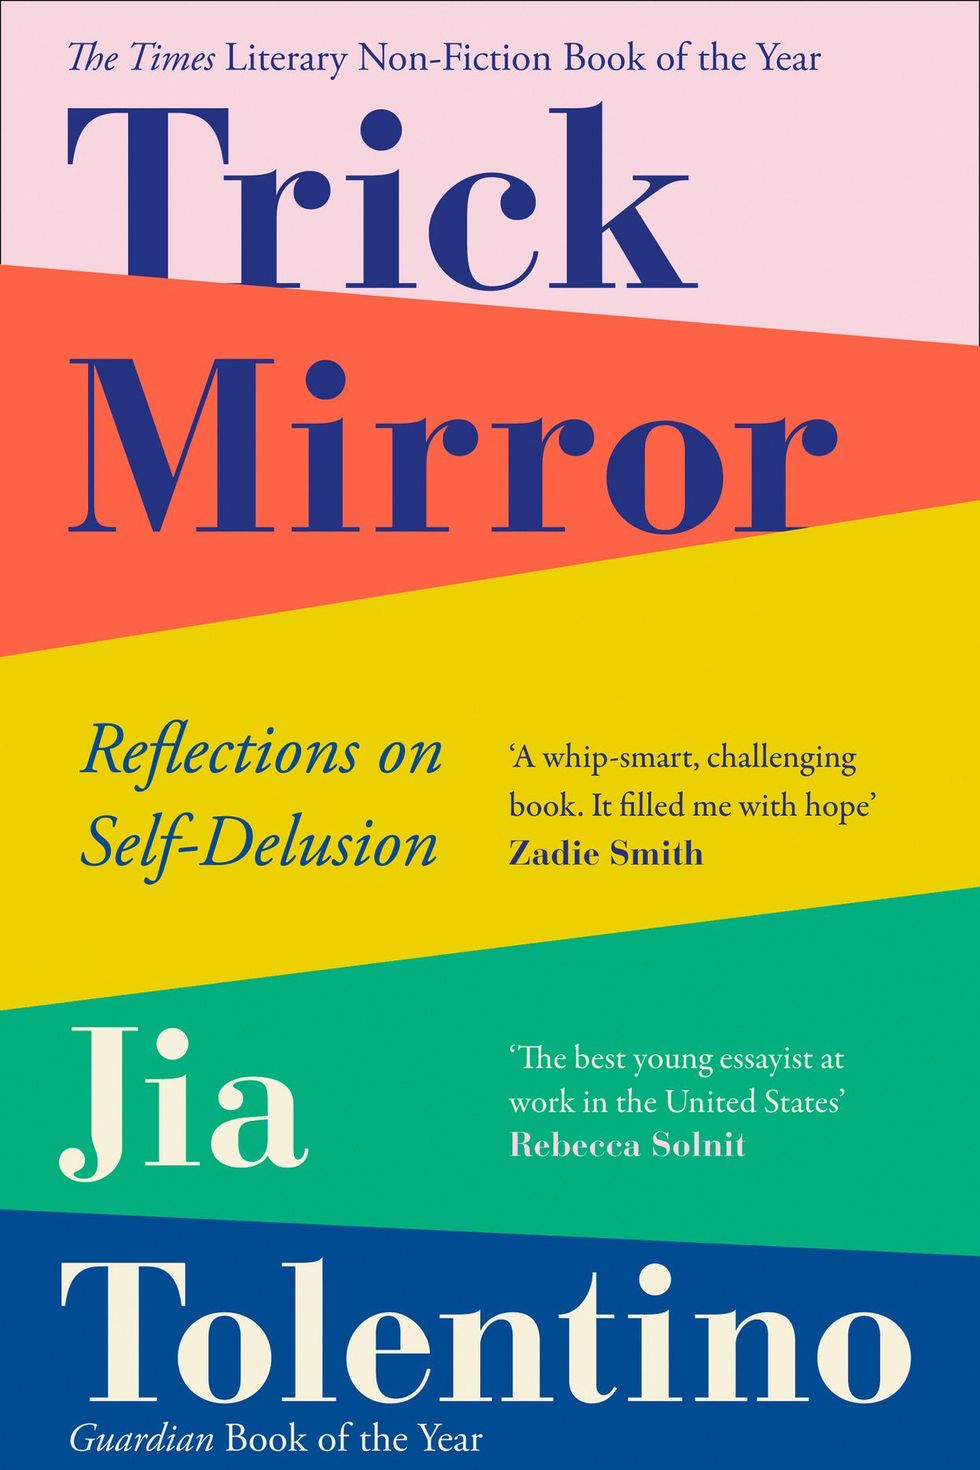 'Trick Mirror: Reflections on Self-Delusion' by Jia Tolentino